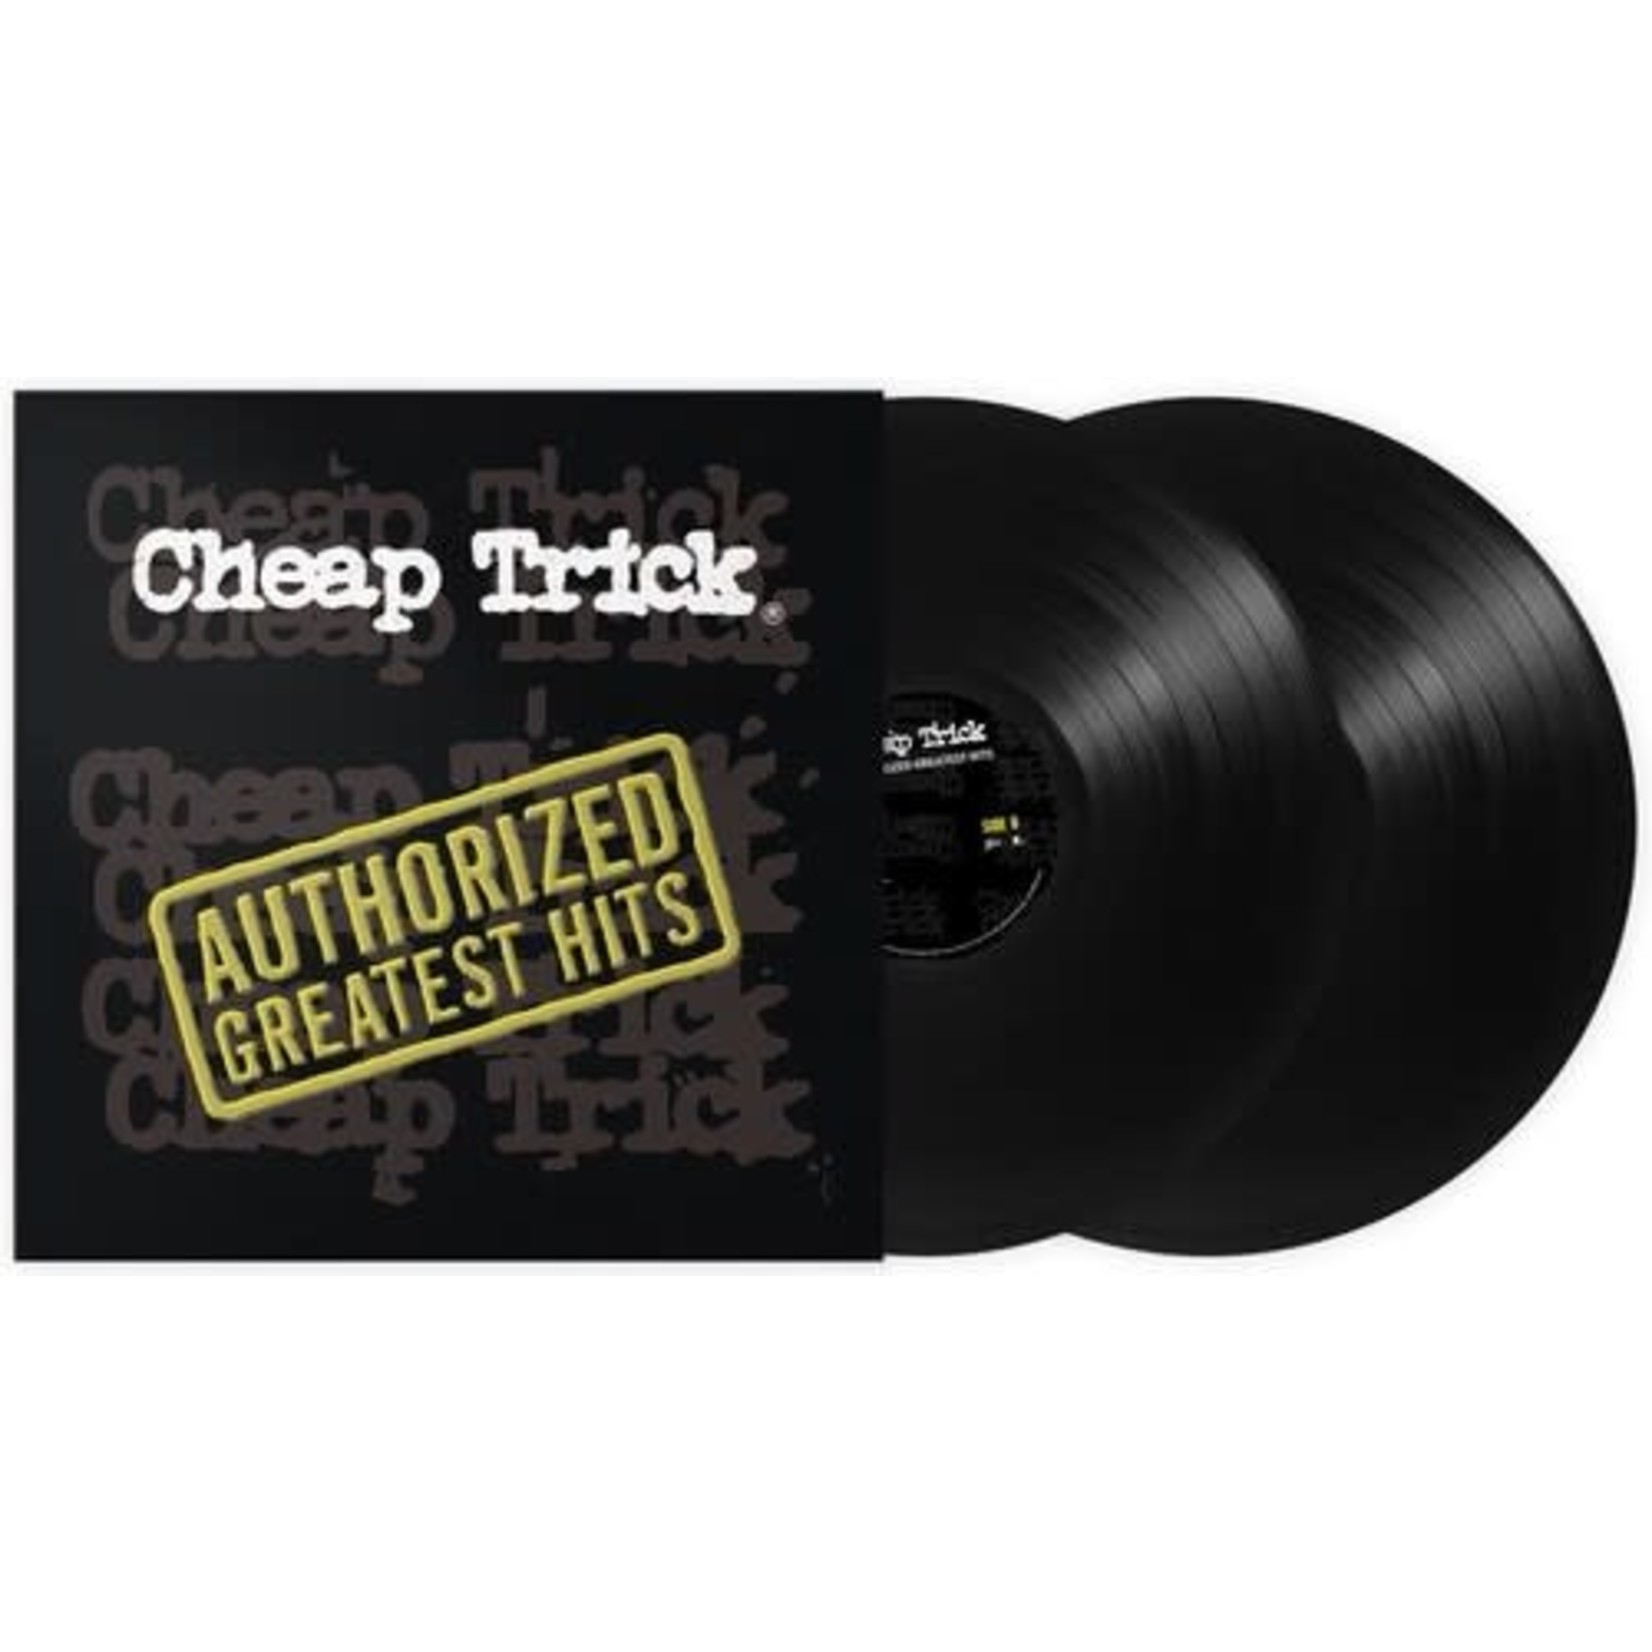 Cheap Trick - Authorized Greatest Hits [2LP]